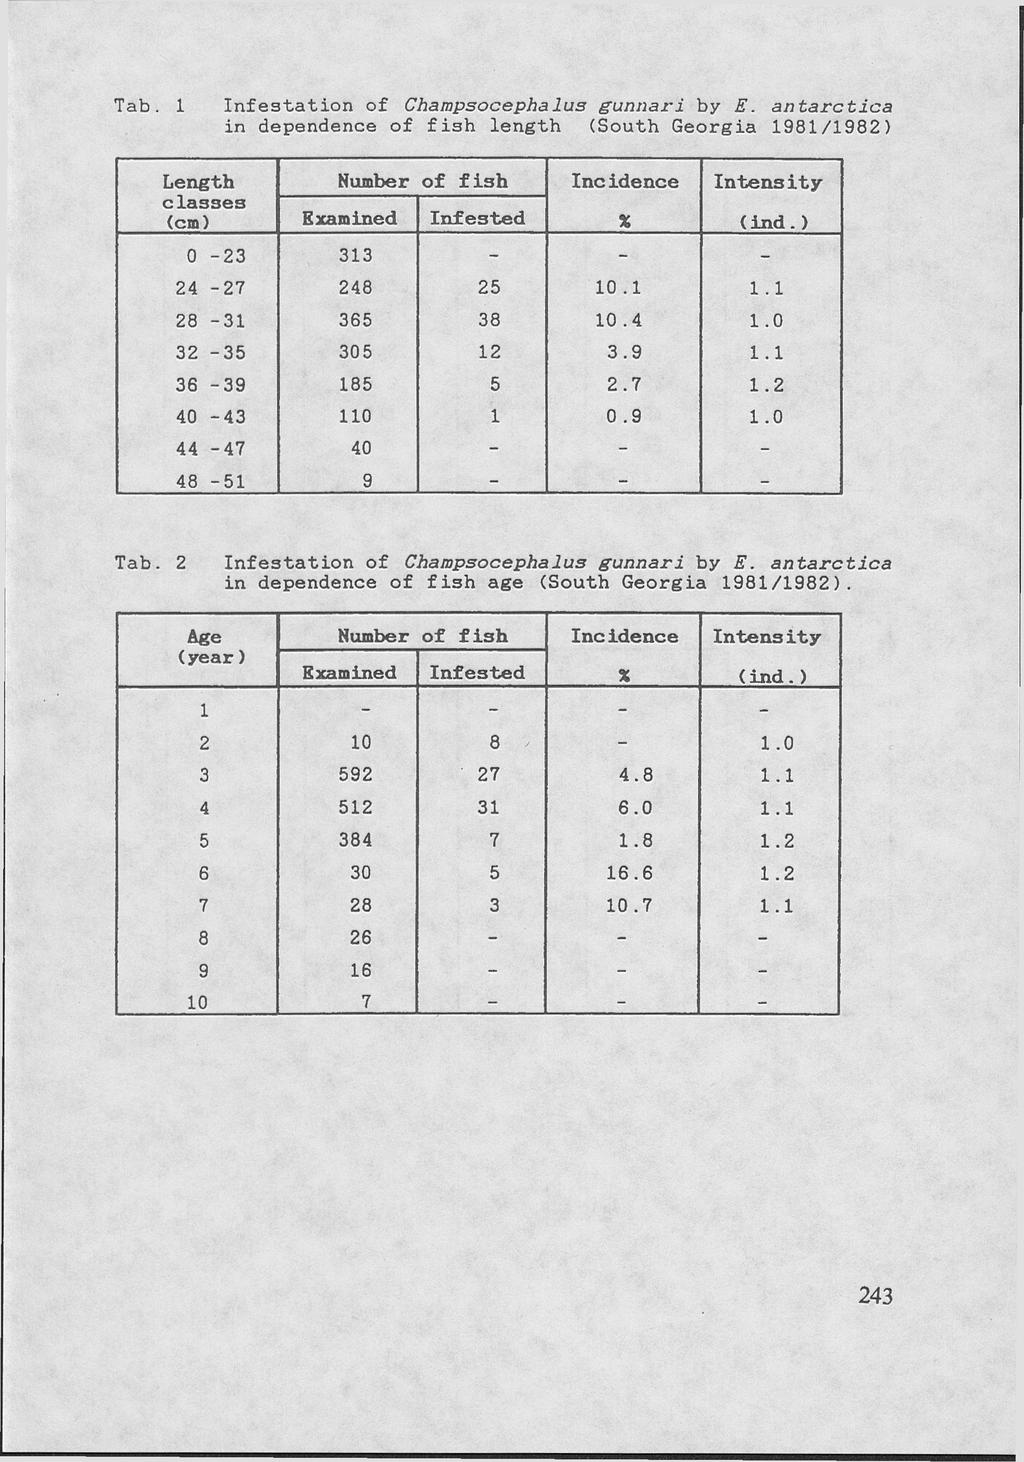 Tab. in dependence of fish length (South Georgia 1 9 8 8 ) Length Number of fish с1аззез <cm) Examined Infested Incidence * Intensity (ind.) 0-23 313 - - - 24-27 248 25 10.1 1.1 28-31 365 38 10.4 1.